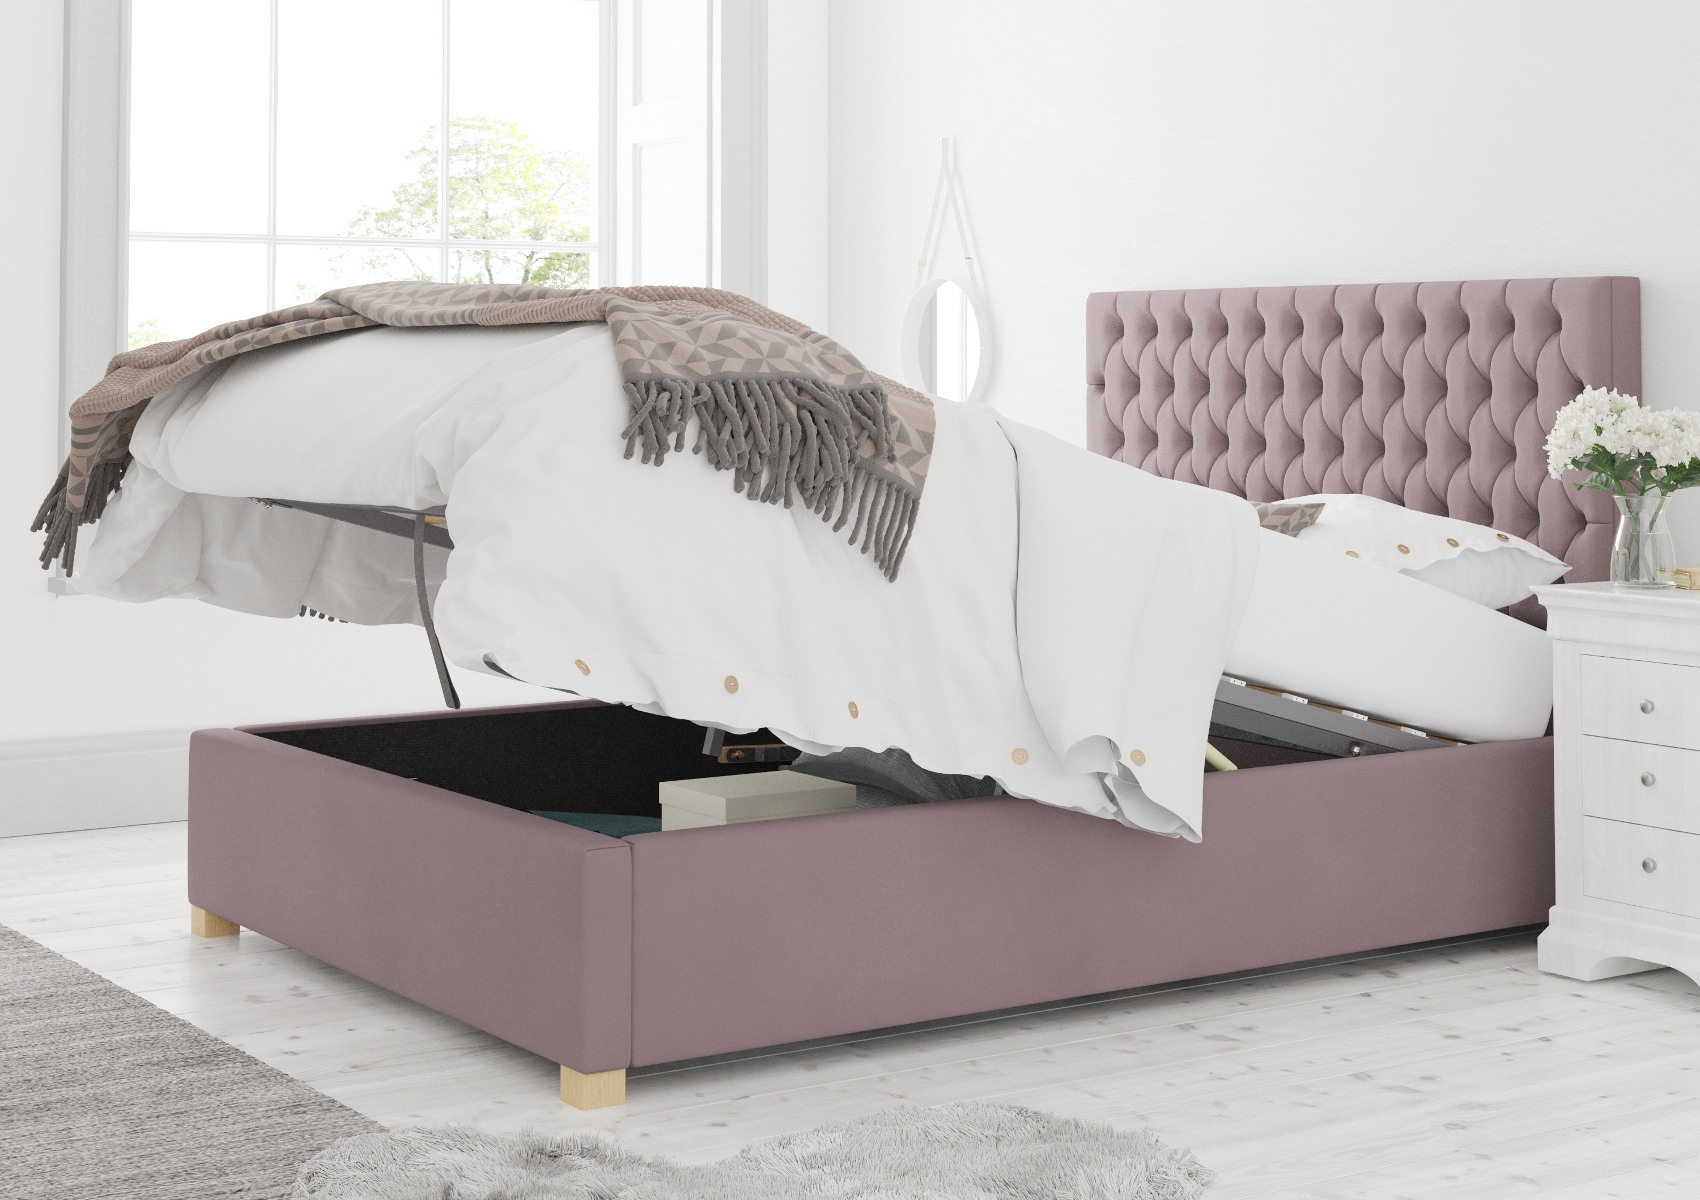 View Malton Blush Upholstered Compact Double Ottoman Bed Time4Sleep information